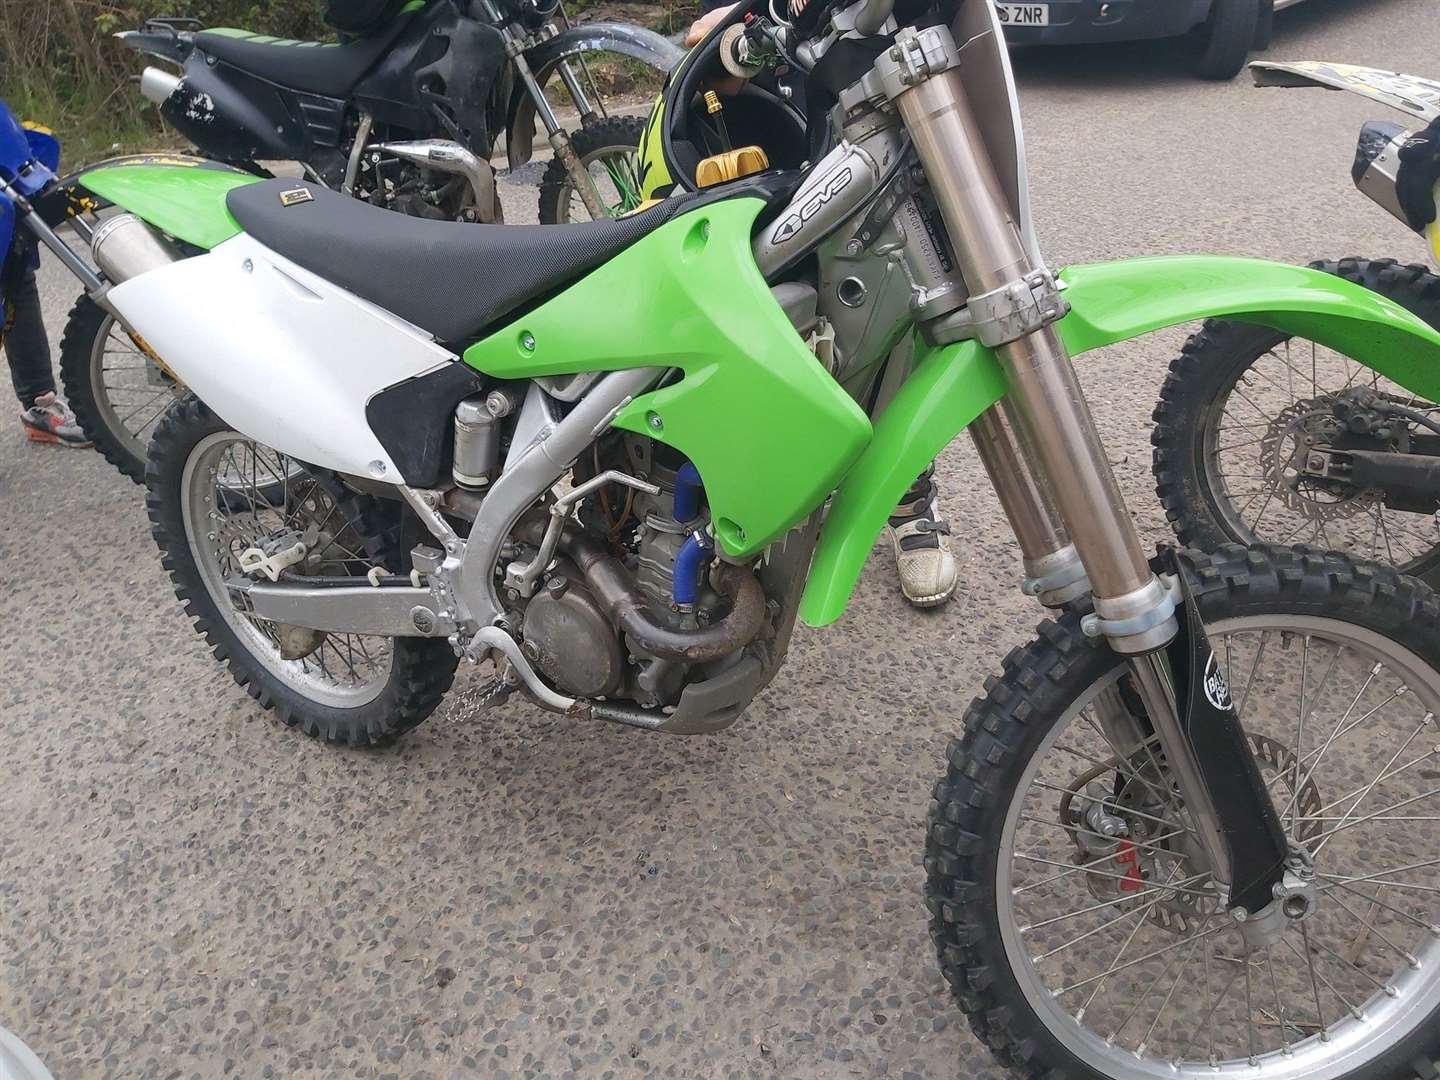 Dirt bikes and a quad bike were found being driven in Darenth Country Park leading to police to issue anti-social behaviour warnings to the riders. Picture: Kent Police